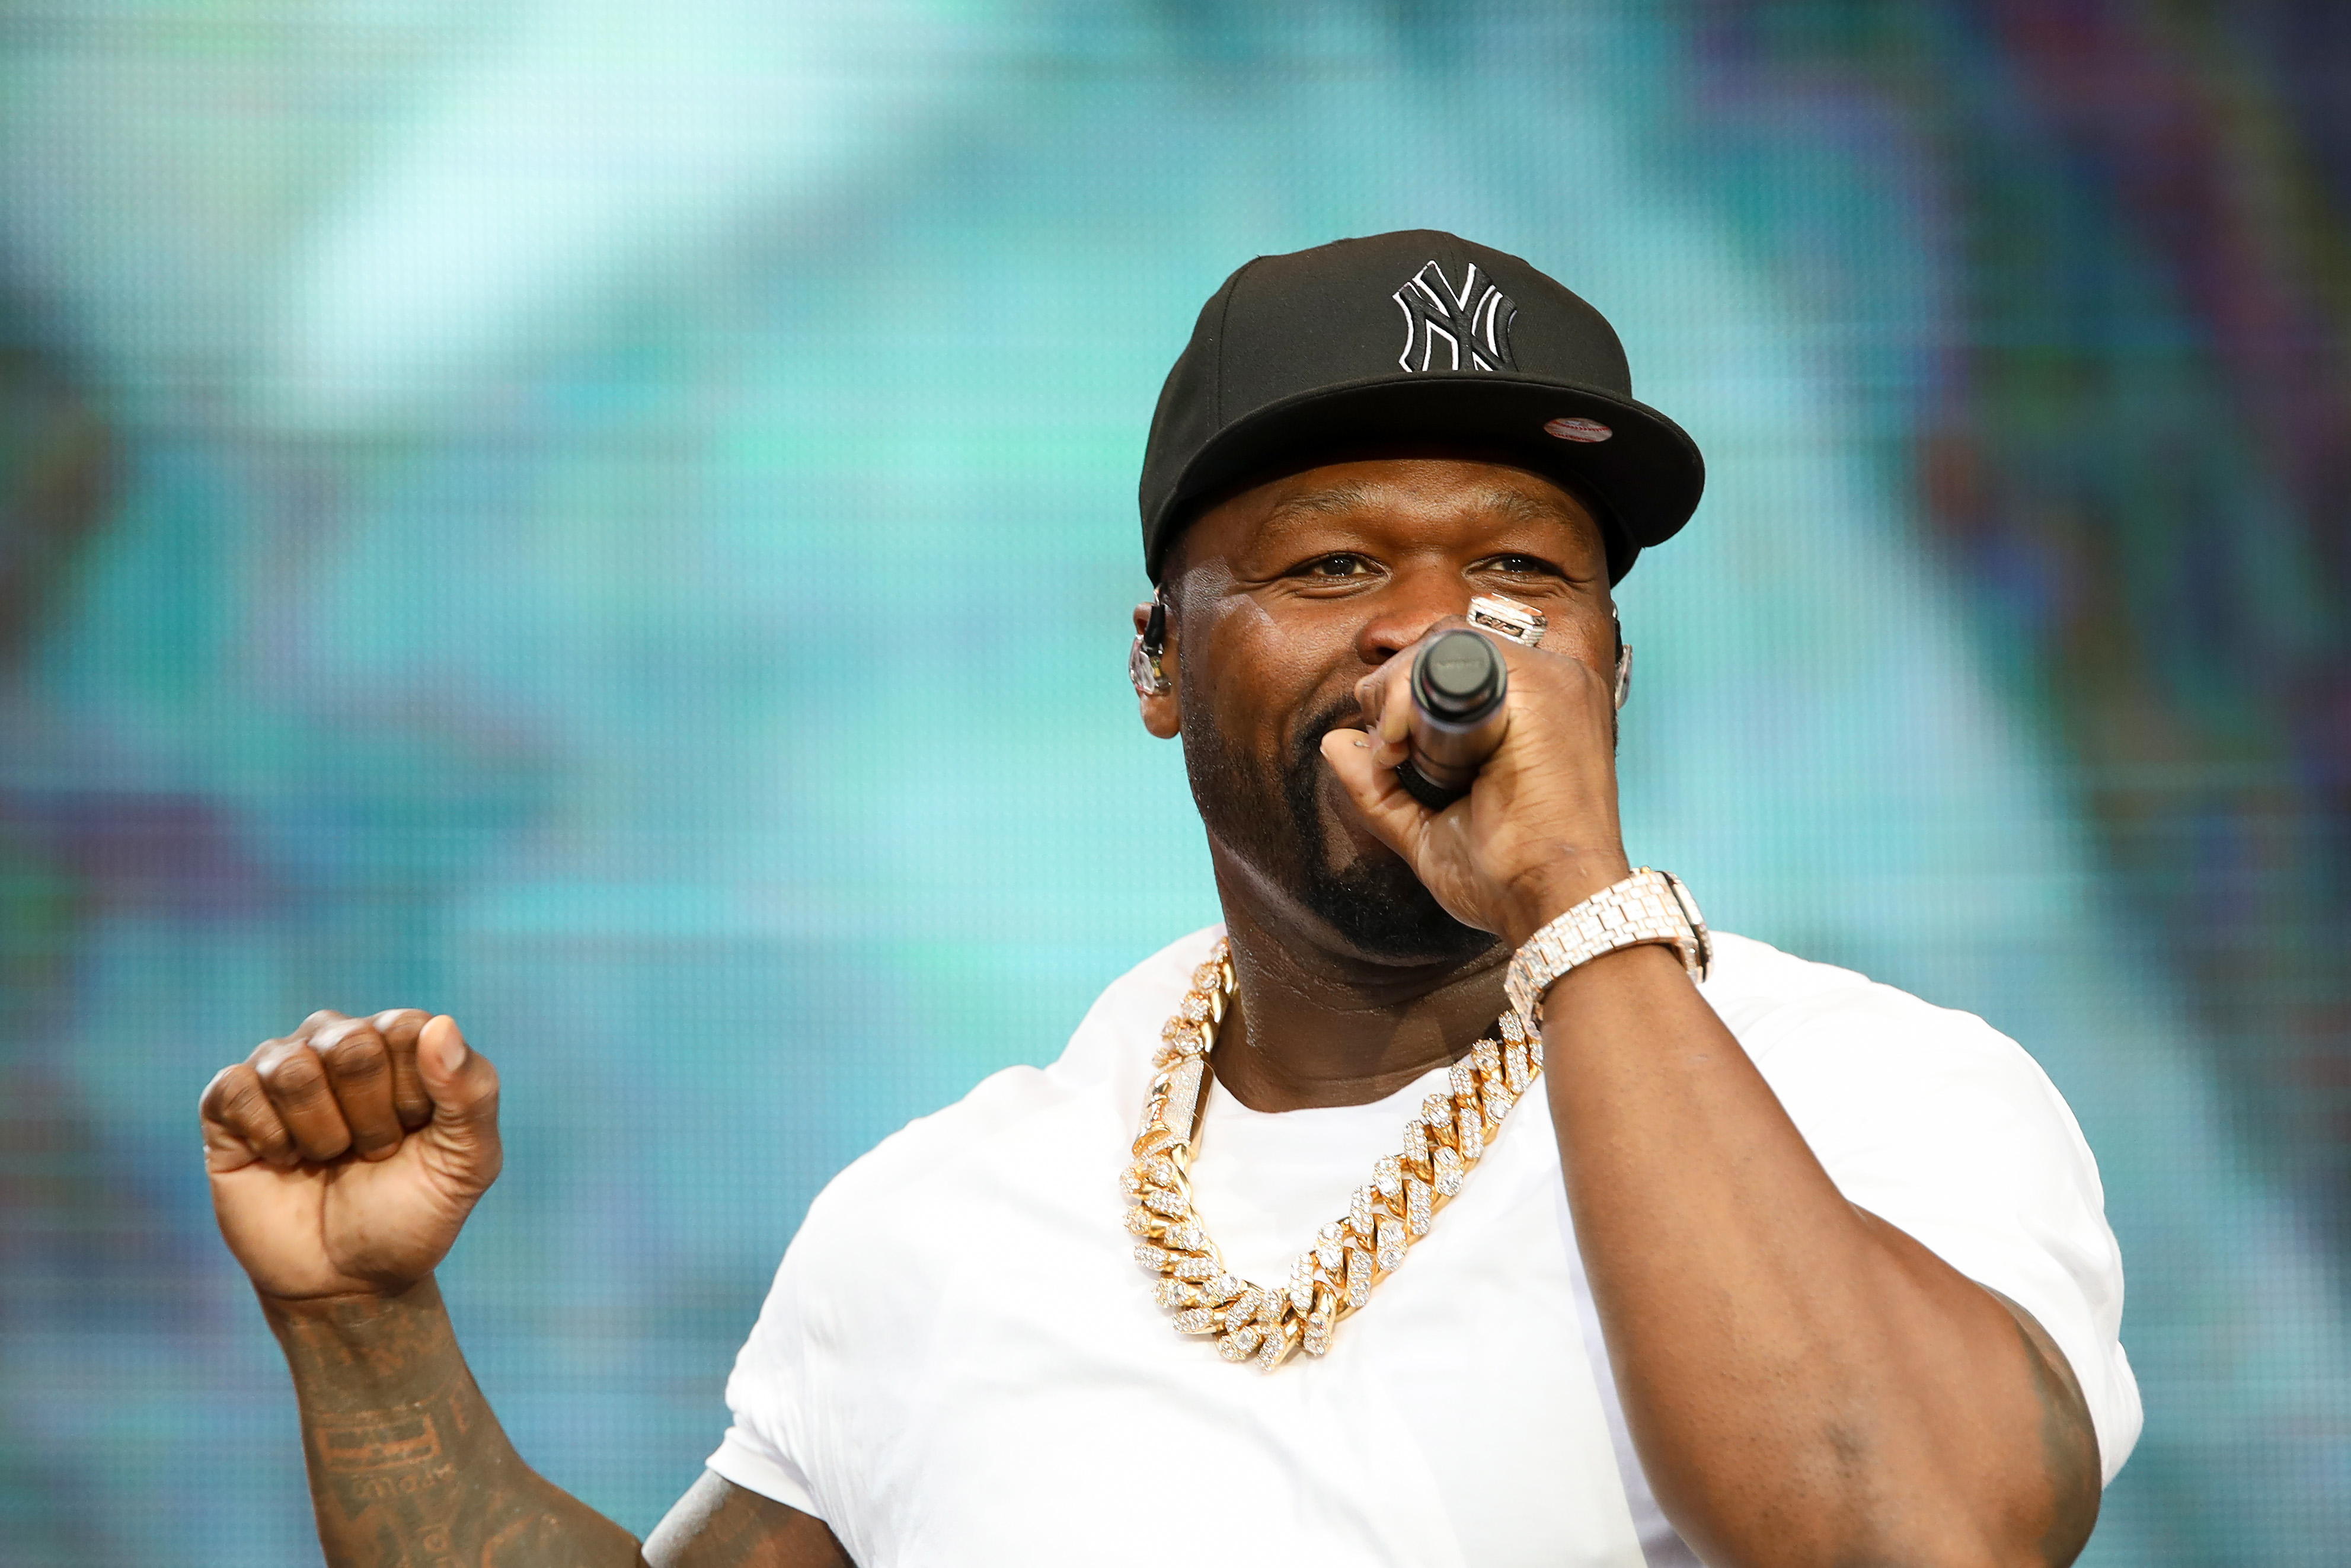 50 Cent Reacts To Animated Video Showcasing His Best Songs